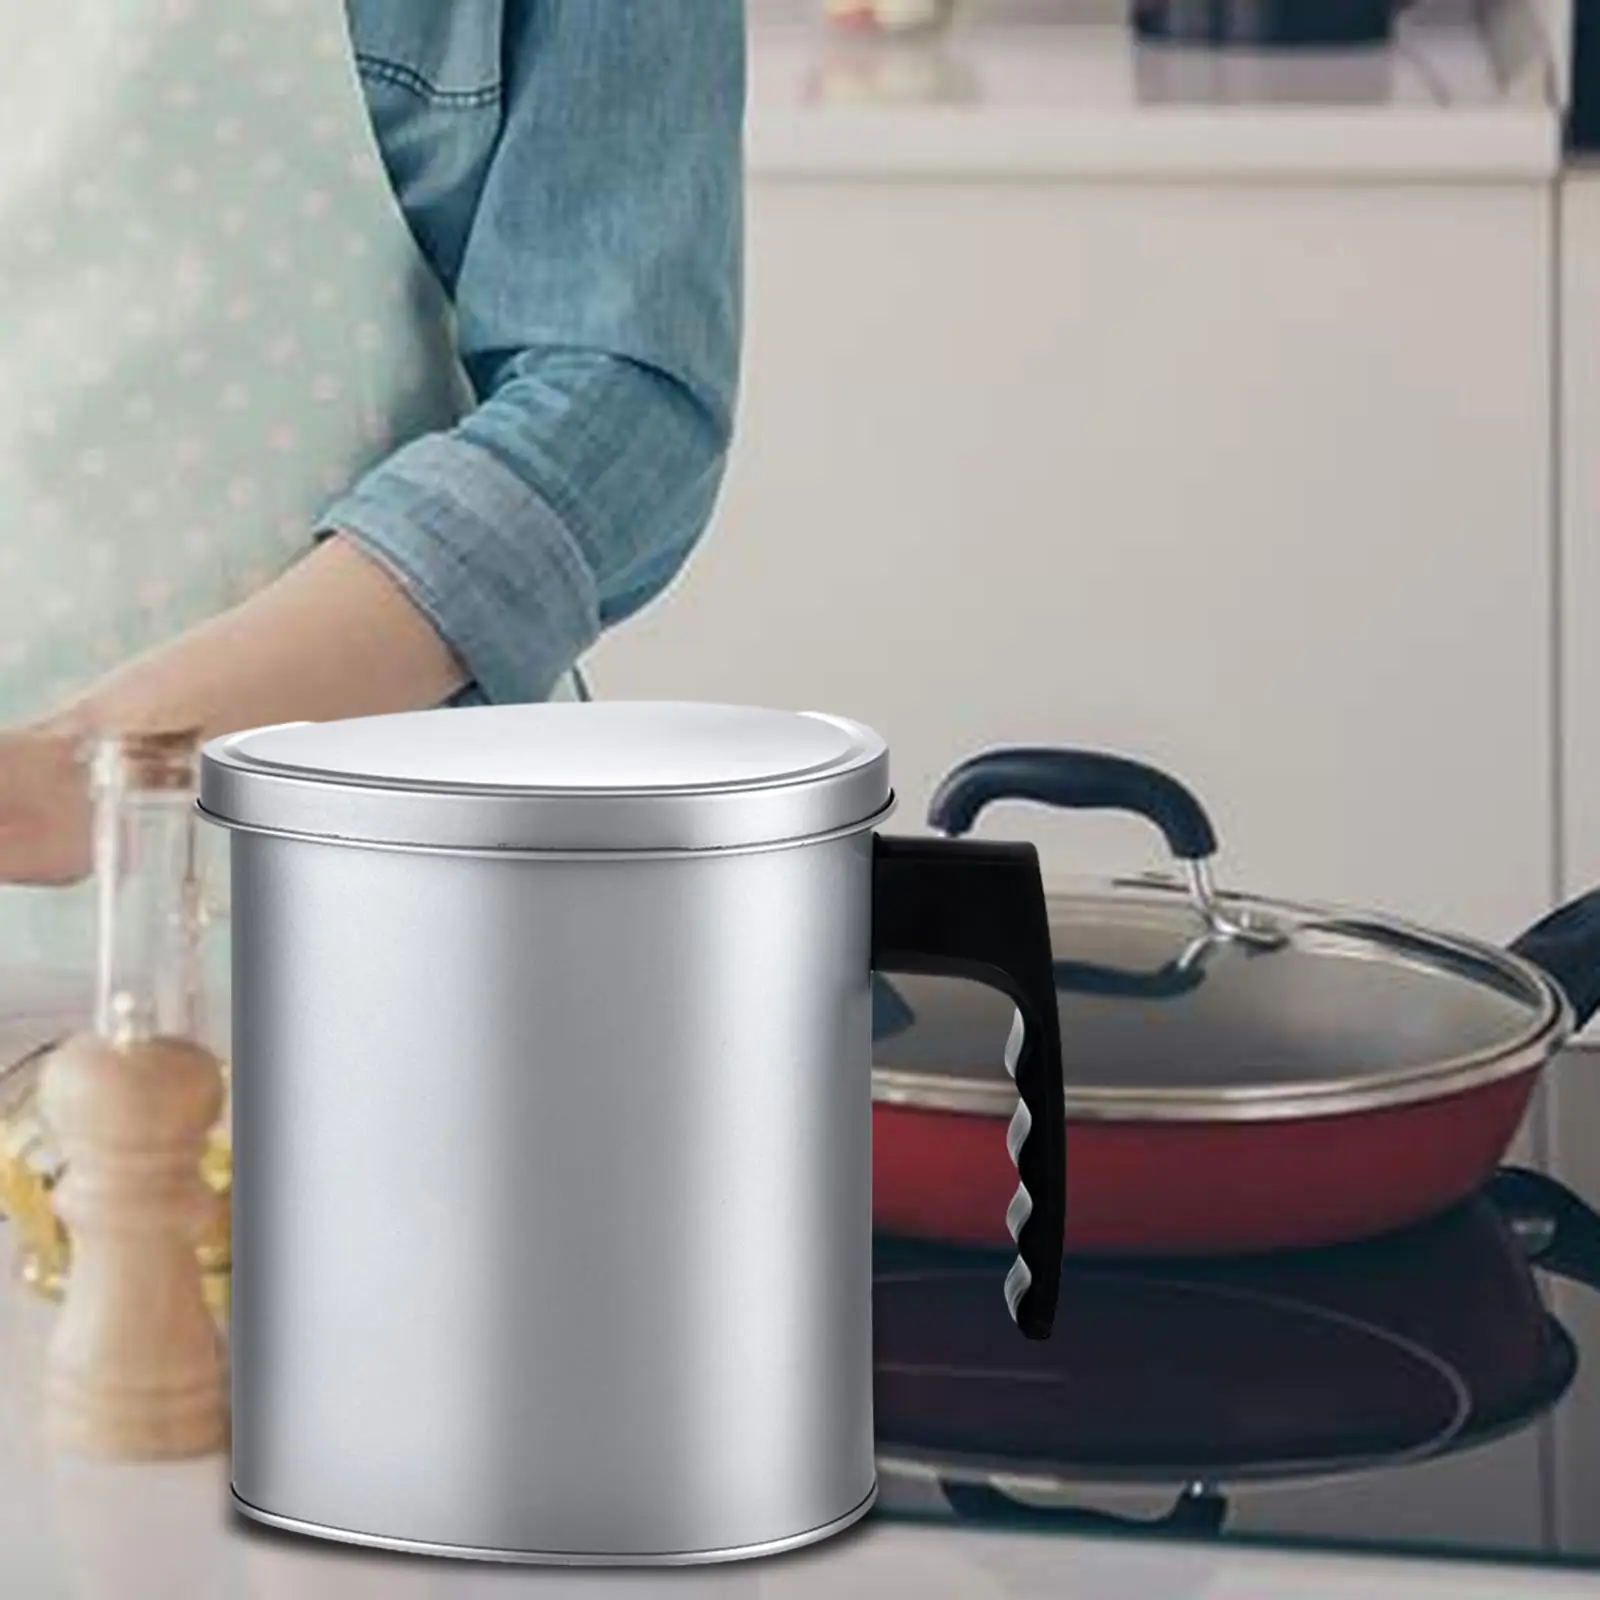 Oil Storage Can 1300ml/43 Ounce Household Storing Frying Oil Cooking Oil Cooking Oil Filter Pot for Restaurant Cooking